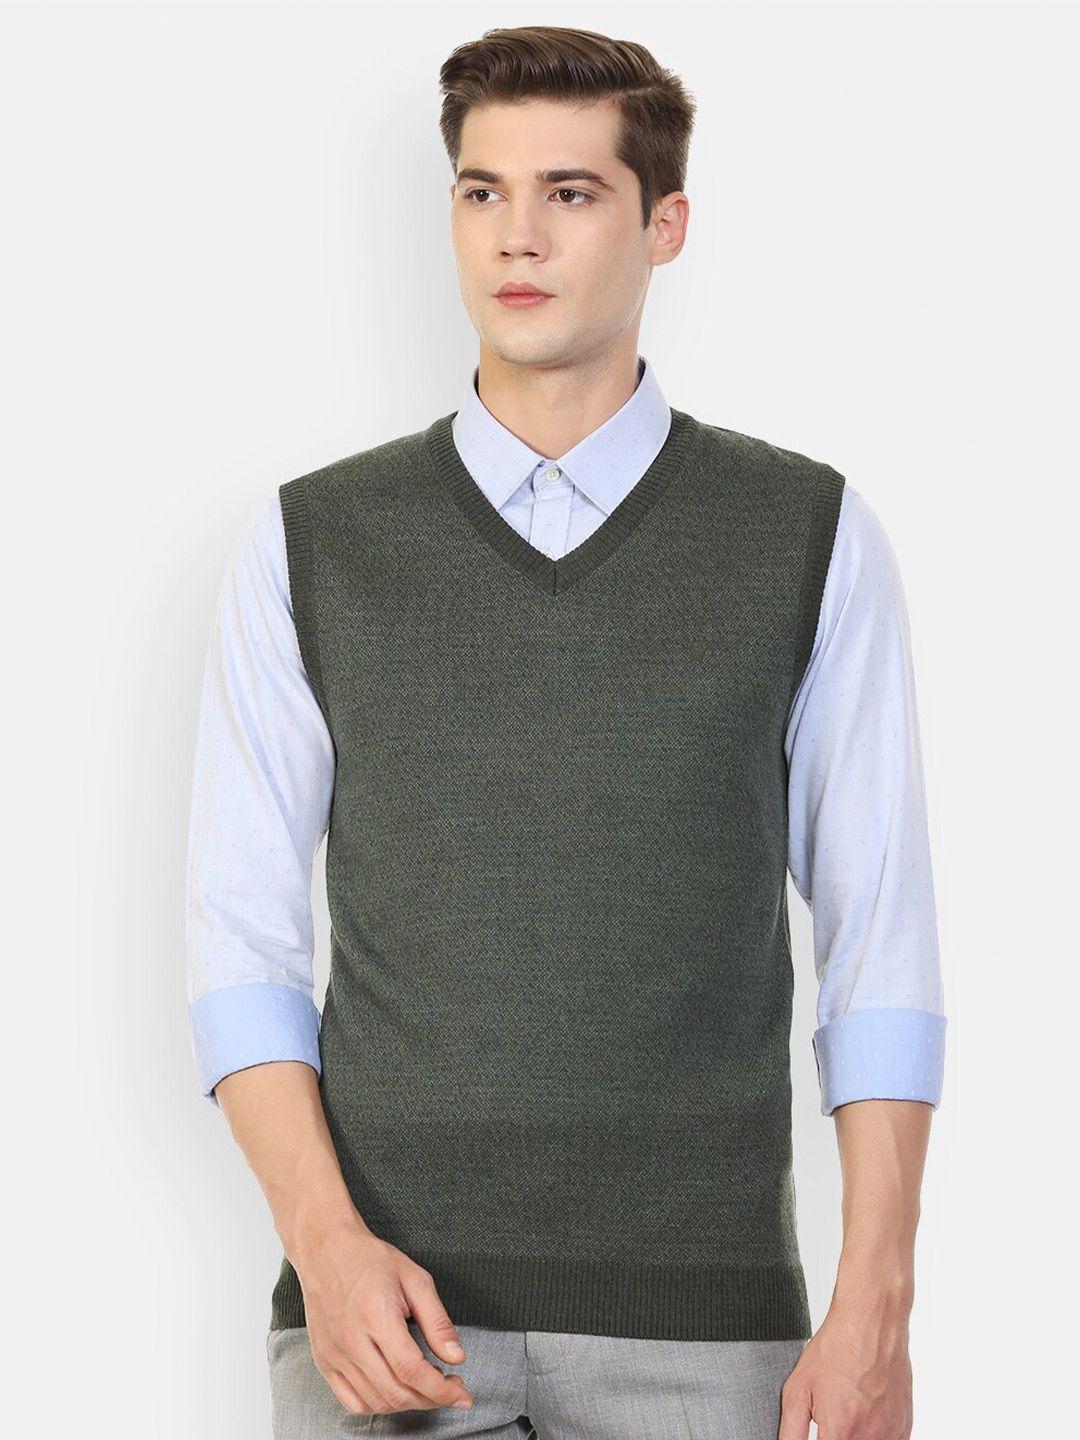 louis philippe men olive green solid sweater vest